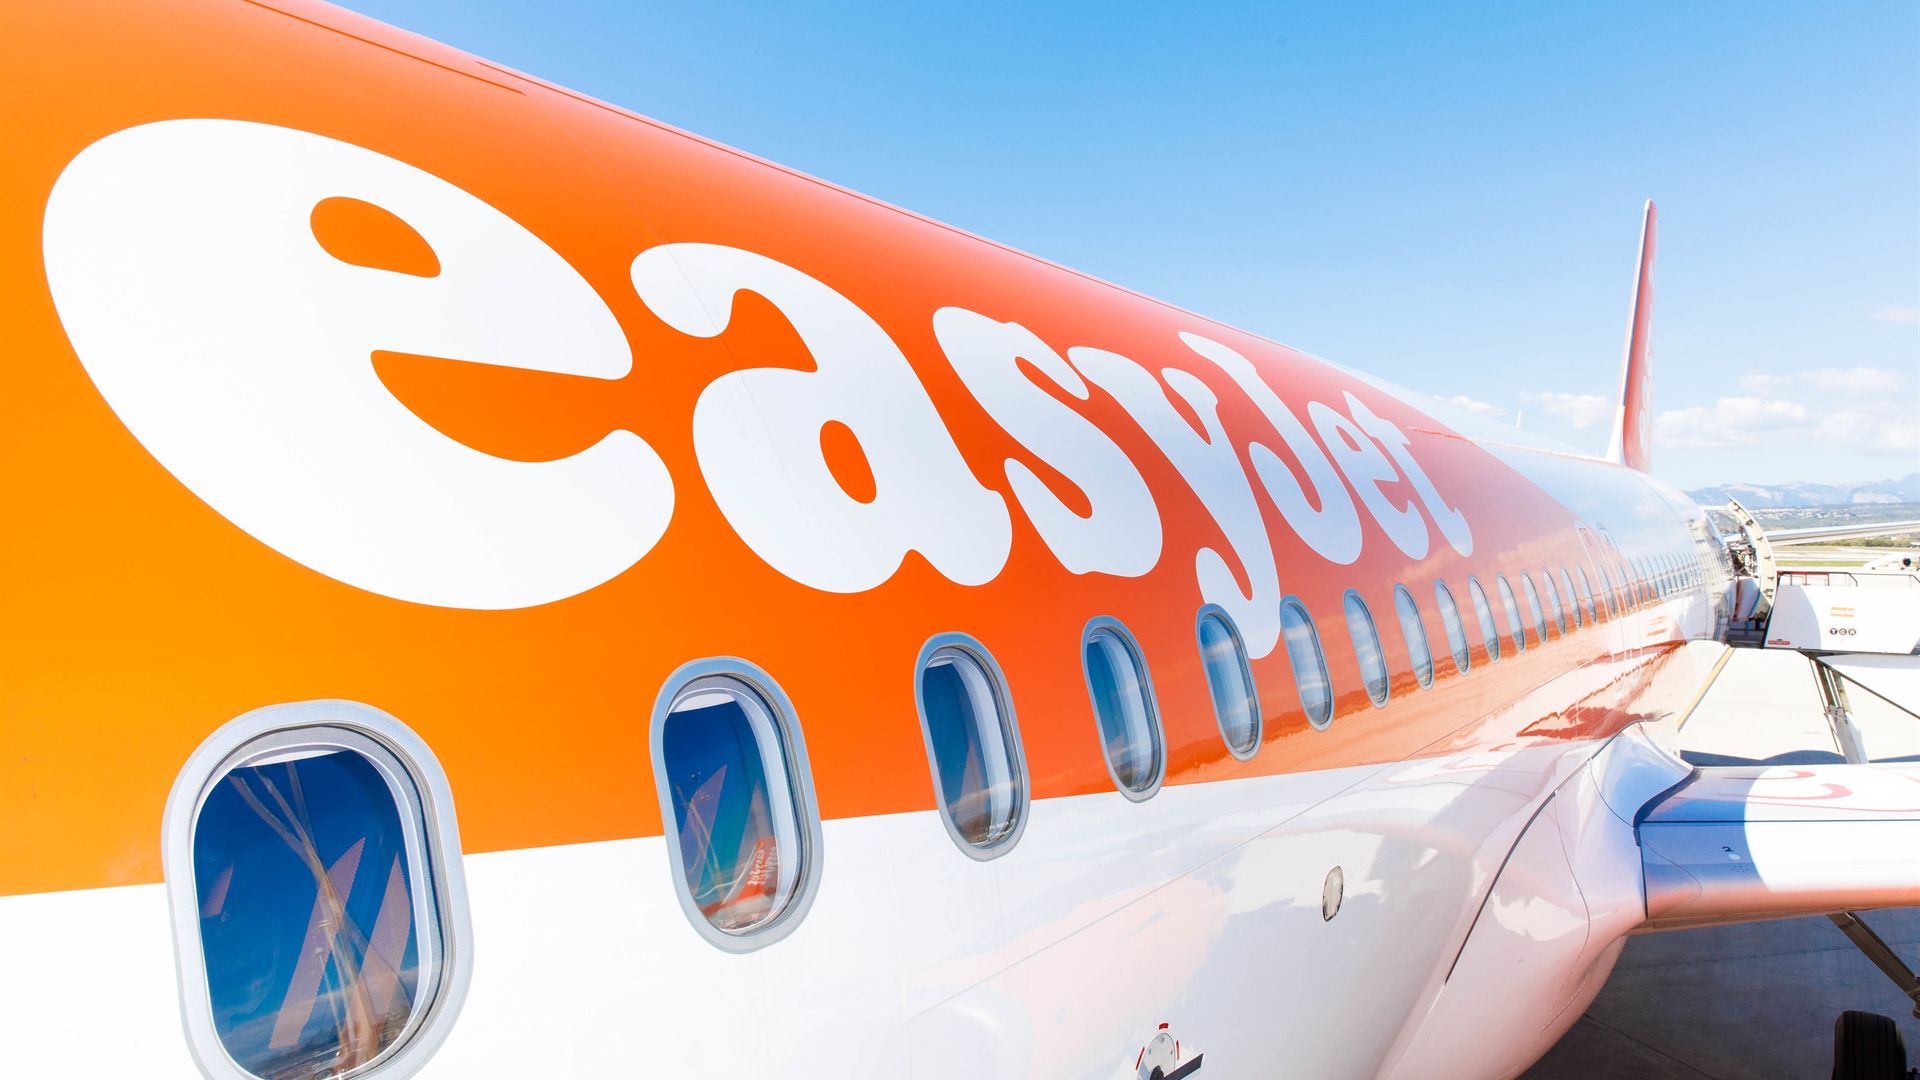 easyJet Fuselage - easyJet's is Europe's second-largest airline